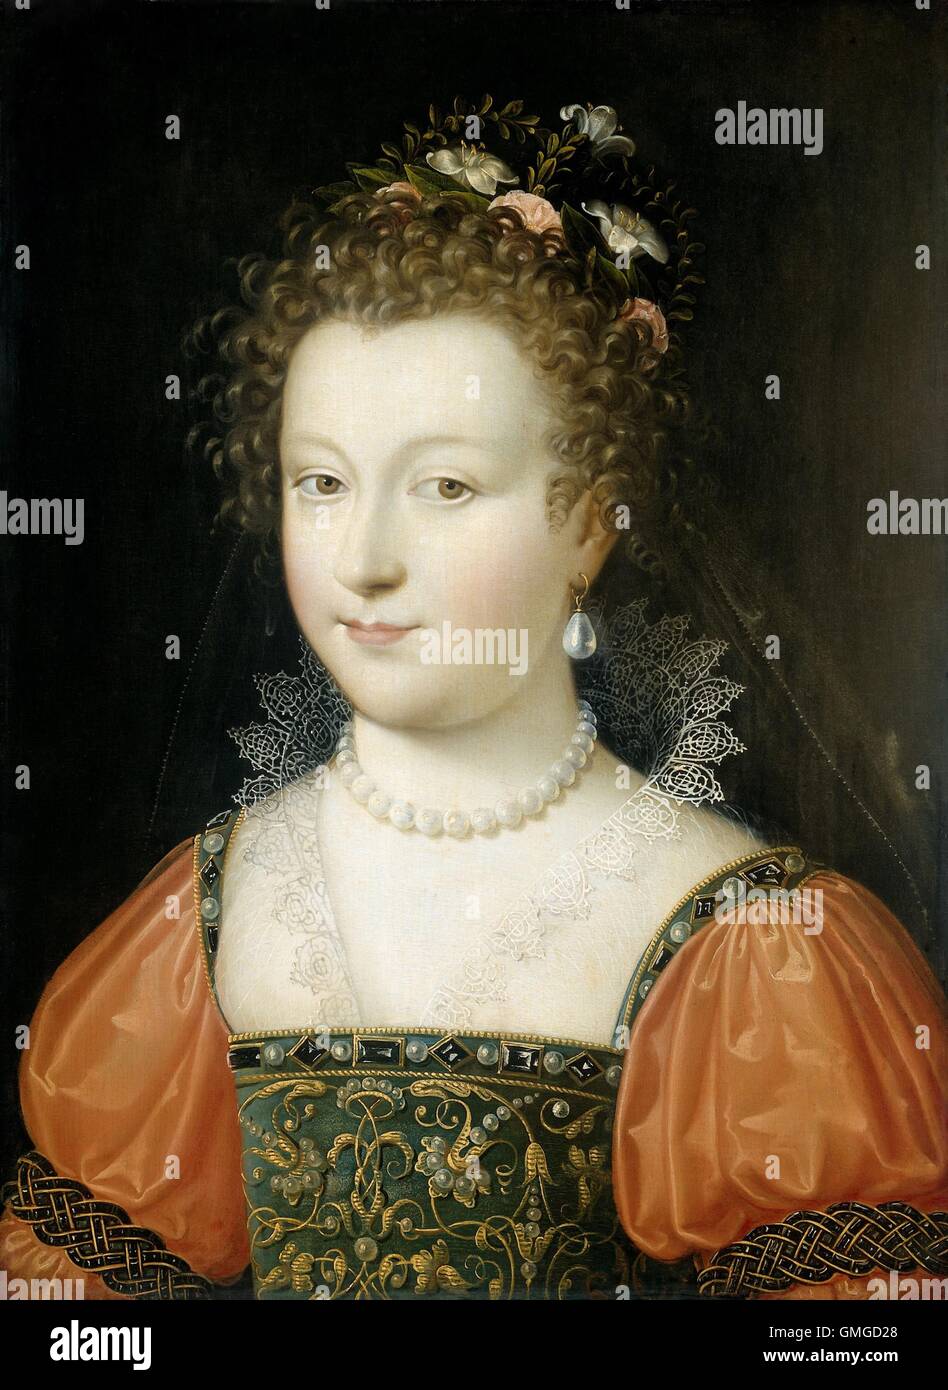 Portrait of a Woman, by Anonymous, 1550-74, Netherlandish painting, oil on panel. Young woman with flowers in her hair, pearl jewelry, and embroidered corset bodice (BSLOC 2016 3 78) Stock Photo